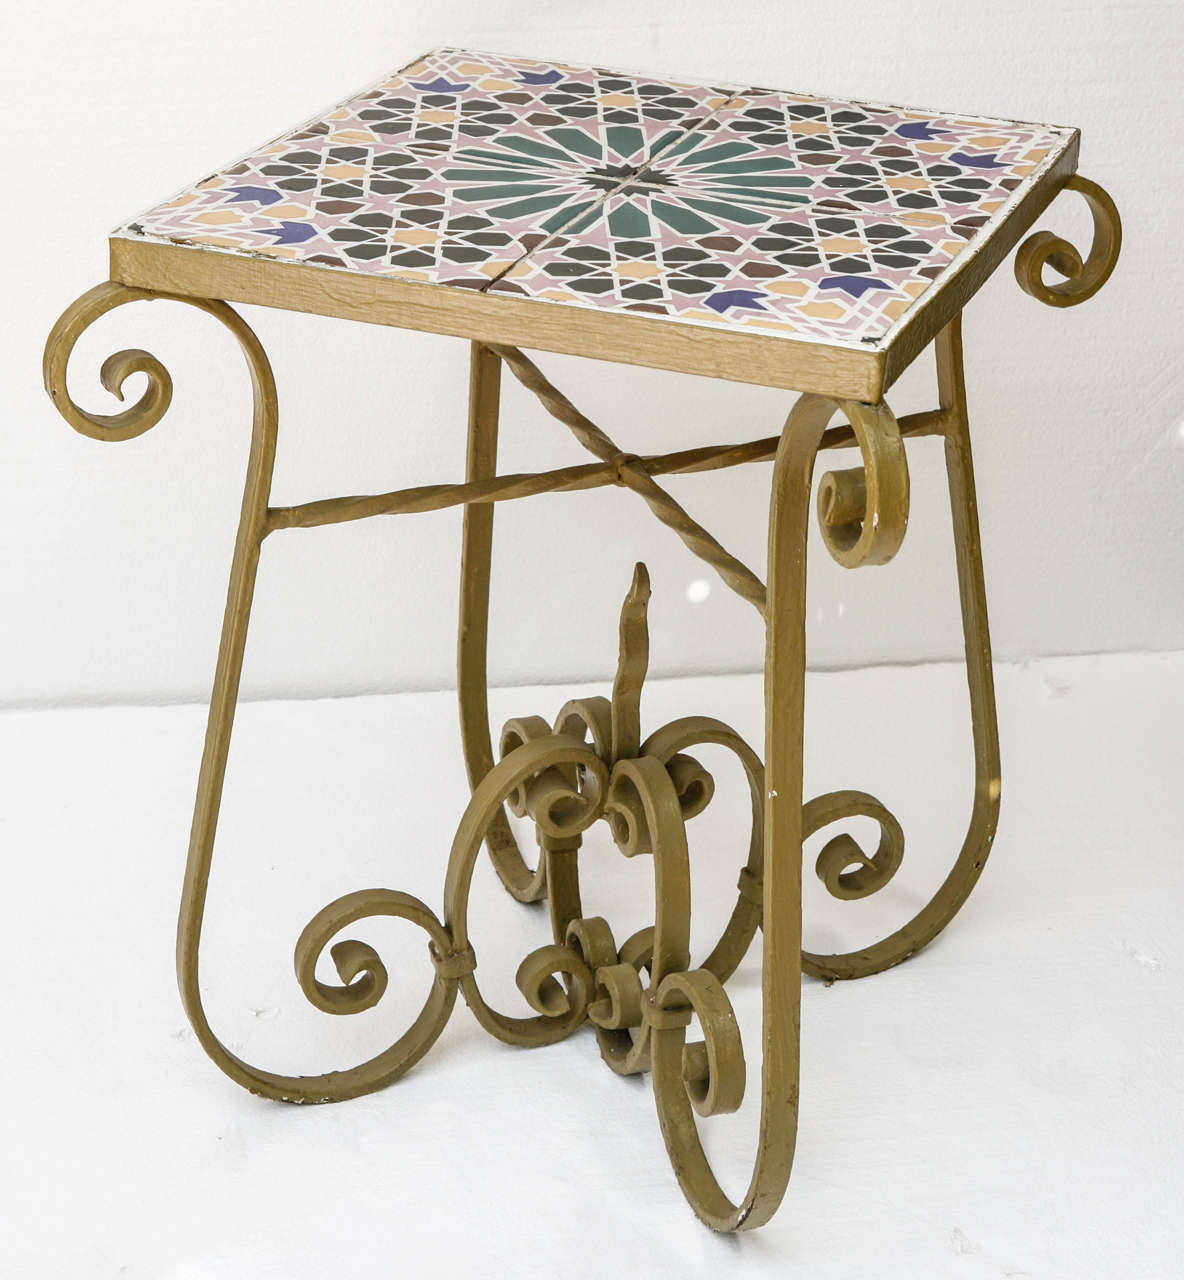 Pair of circa 1920 American tile topped tables with wrought iron bases.   Original four tiles compose the top surface. Old paint with many layers underneath.  Heavy and in great condition. 